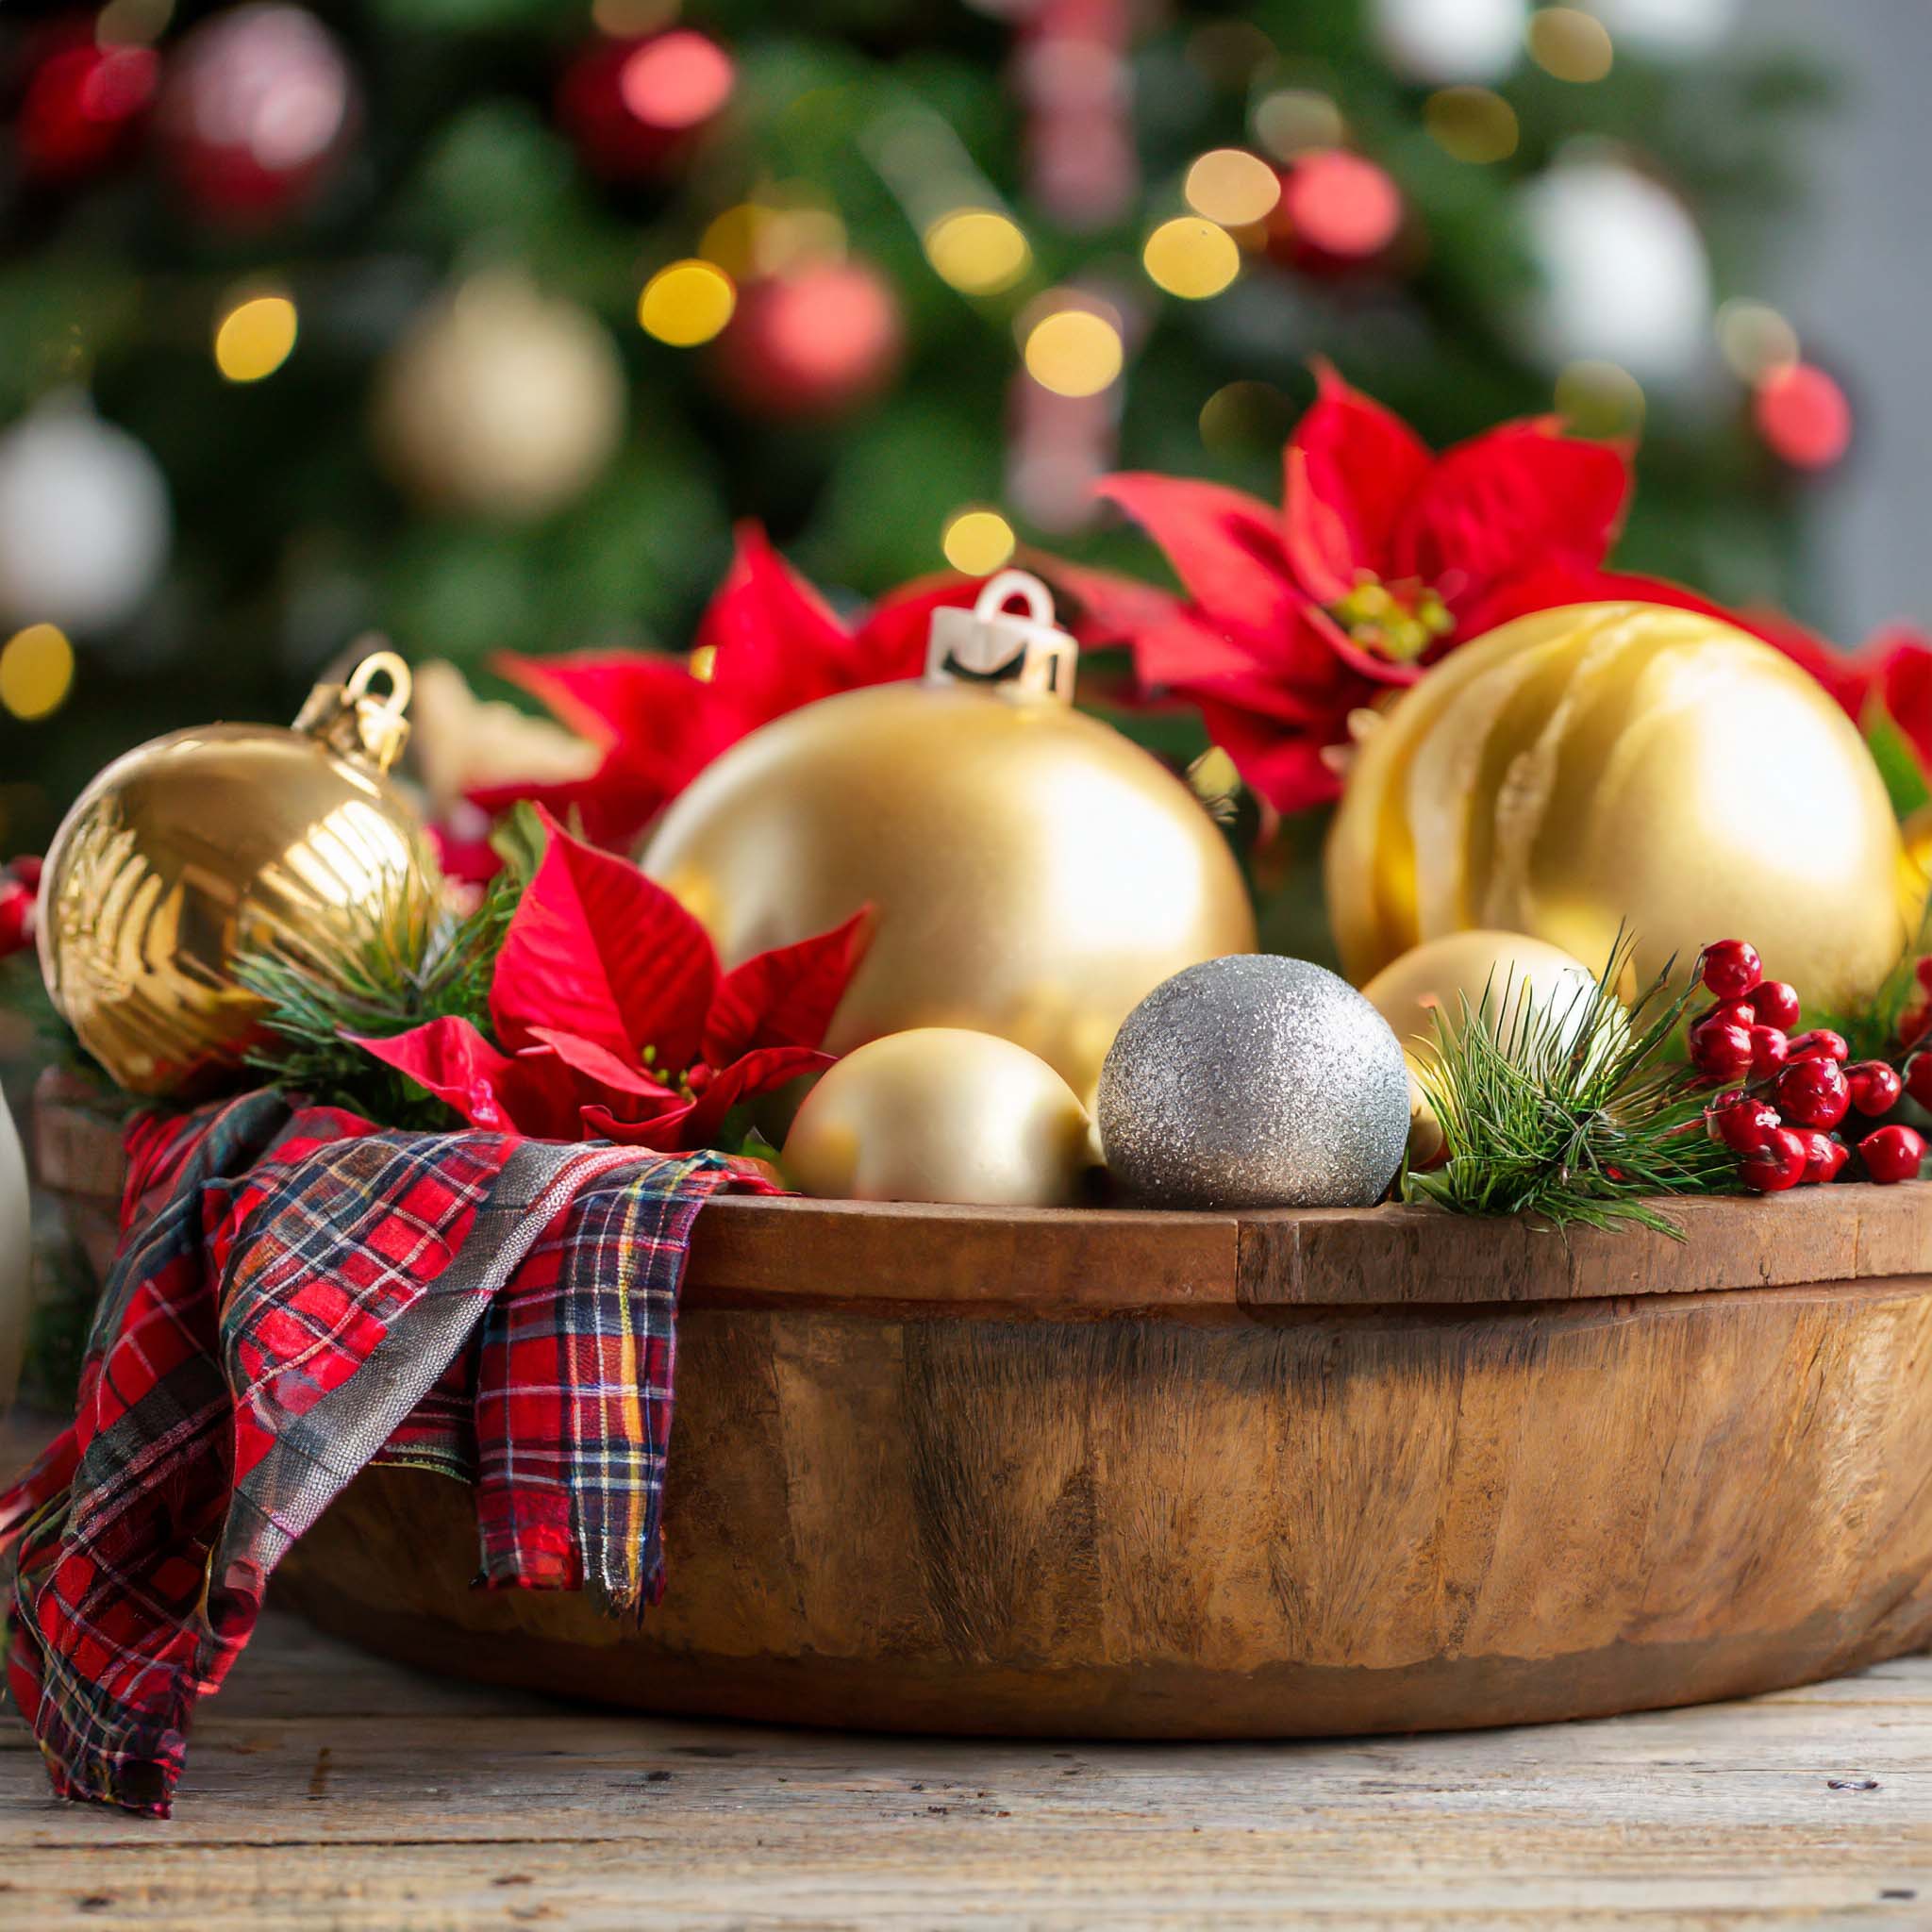 Wooden dough bowl filled with holiday ornaments, plaid ribbon, poinsettias, and berry sprays.